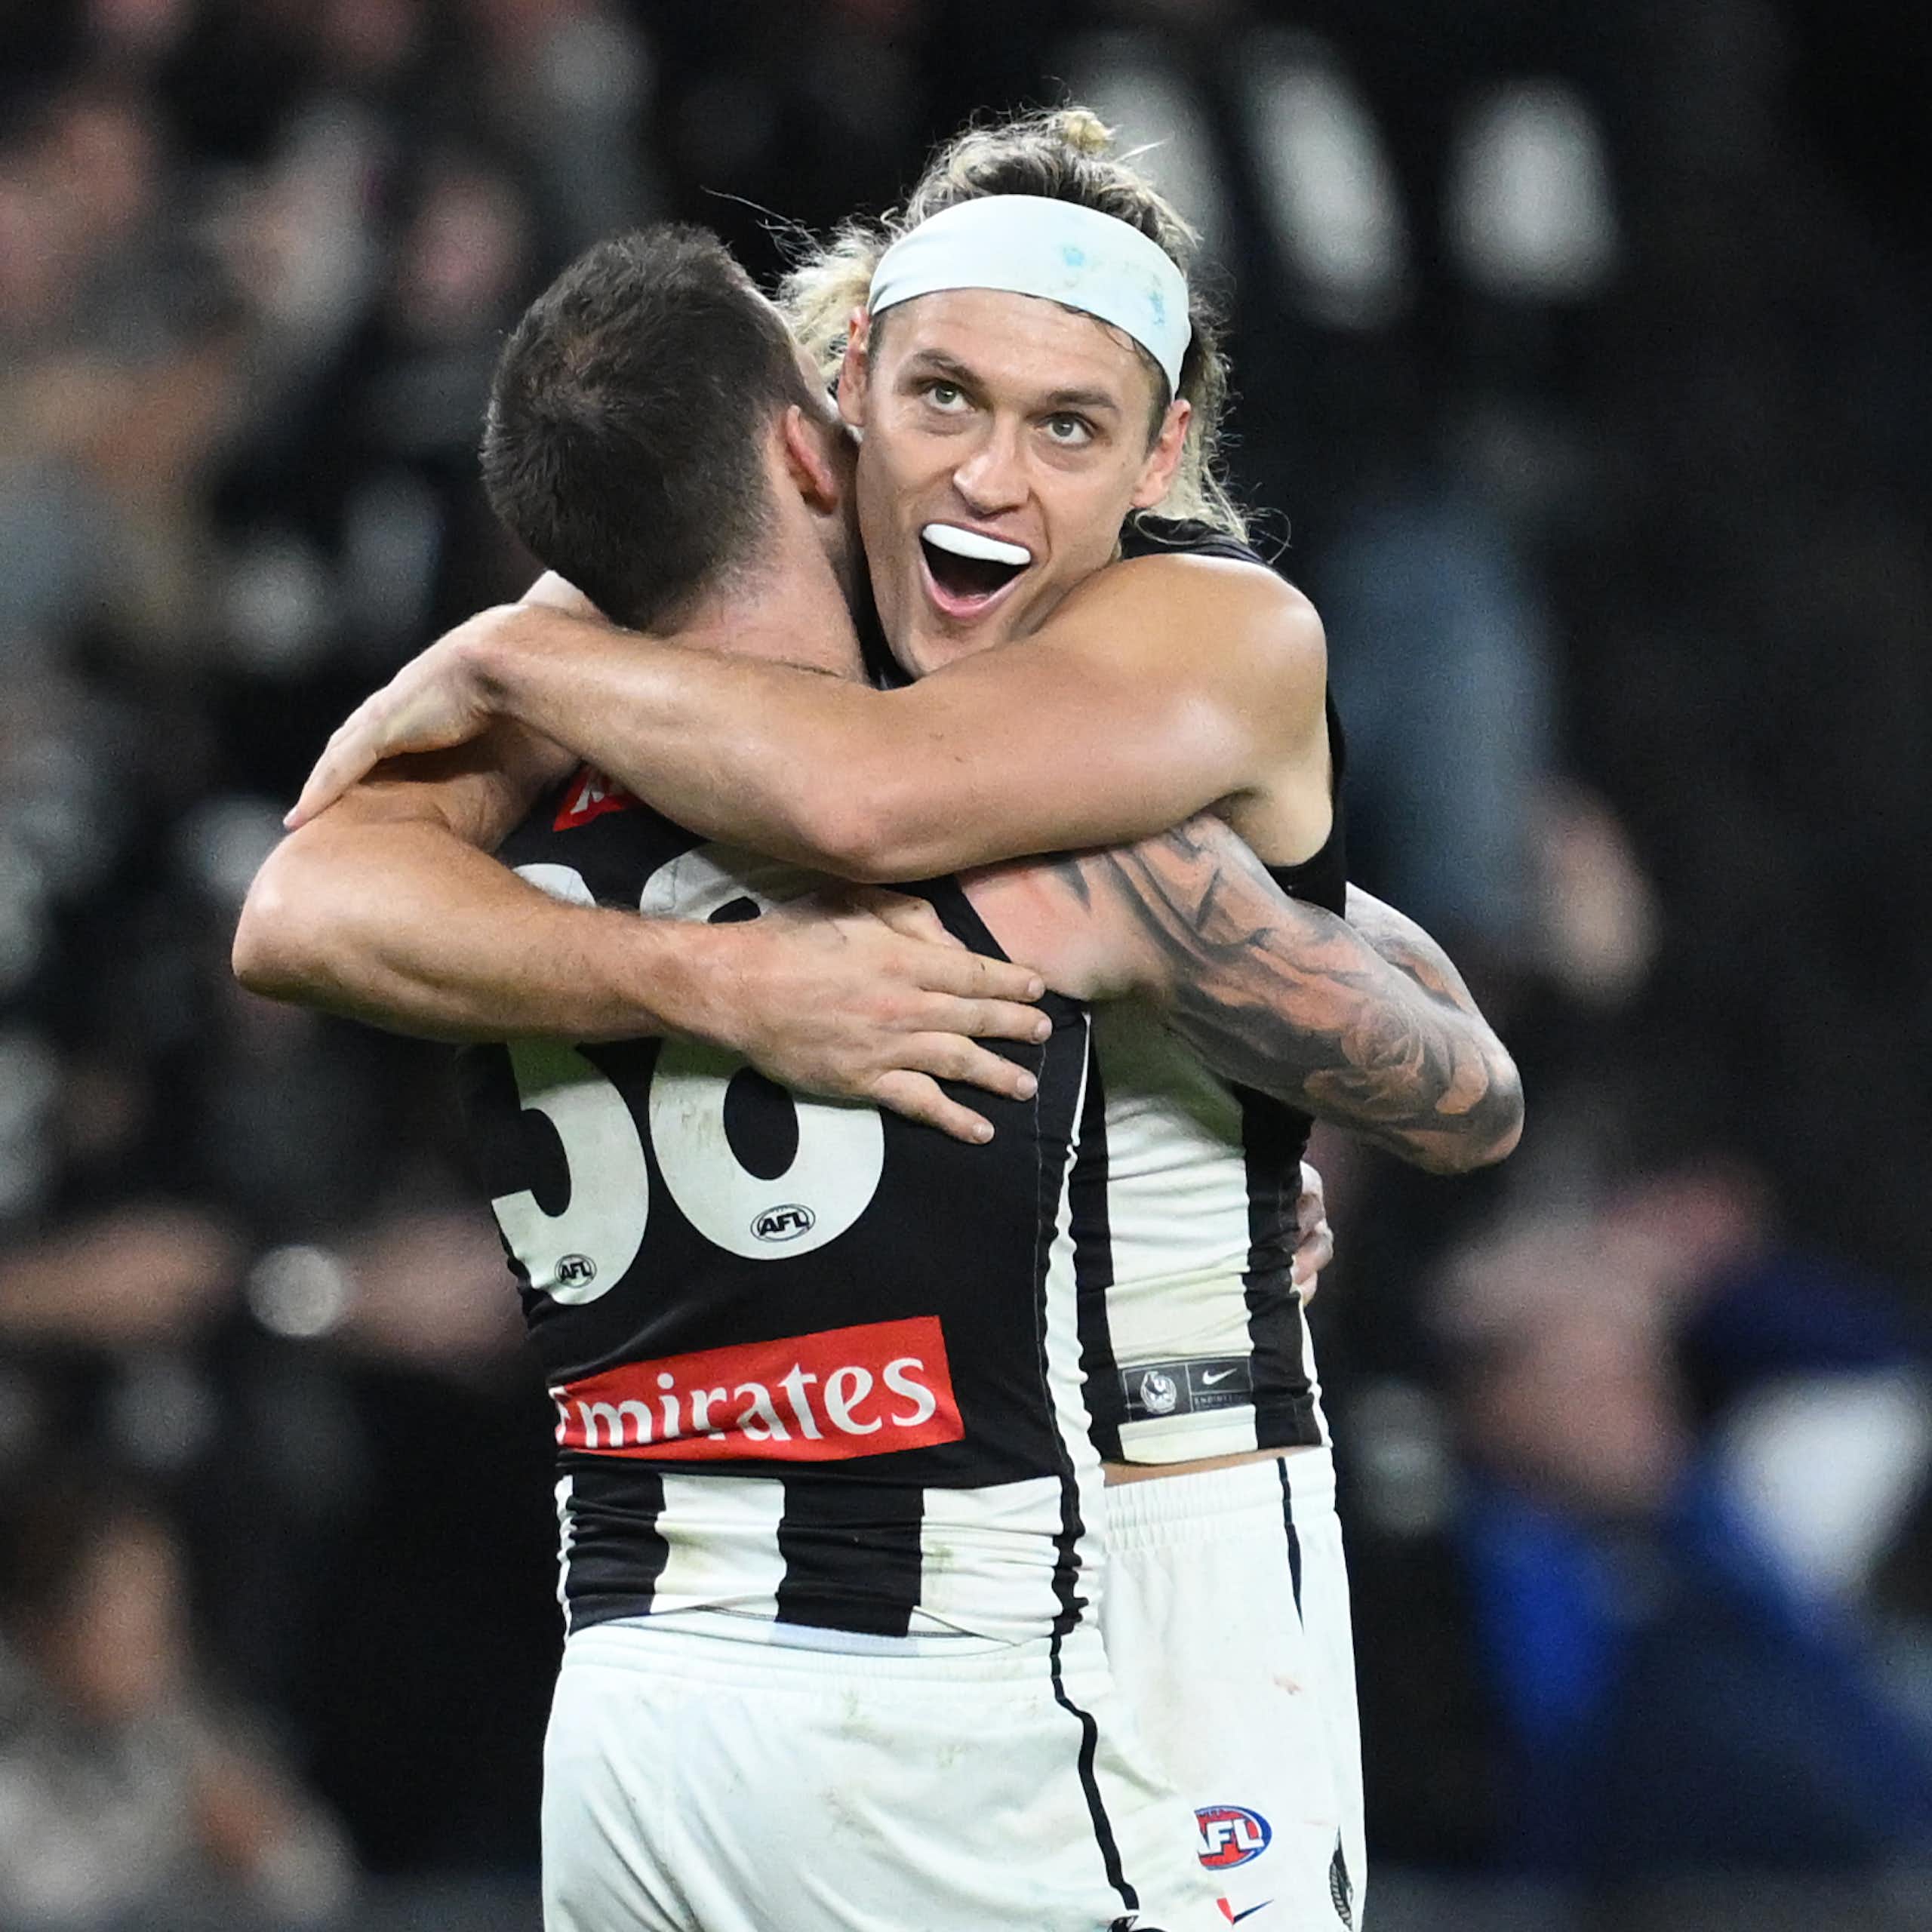 Collingwood players celebrate another remarkable comeback